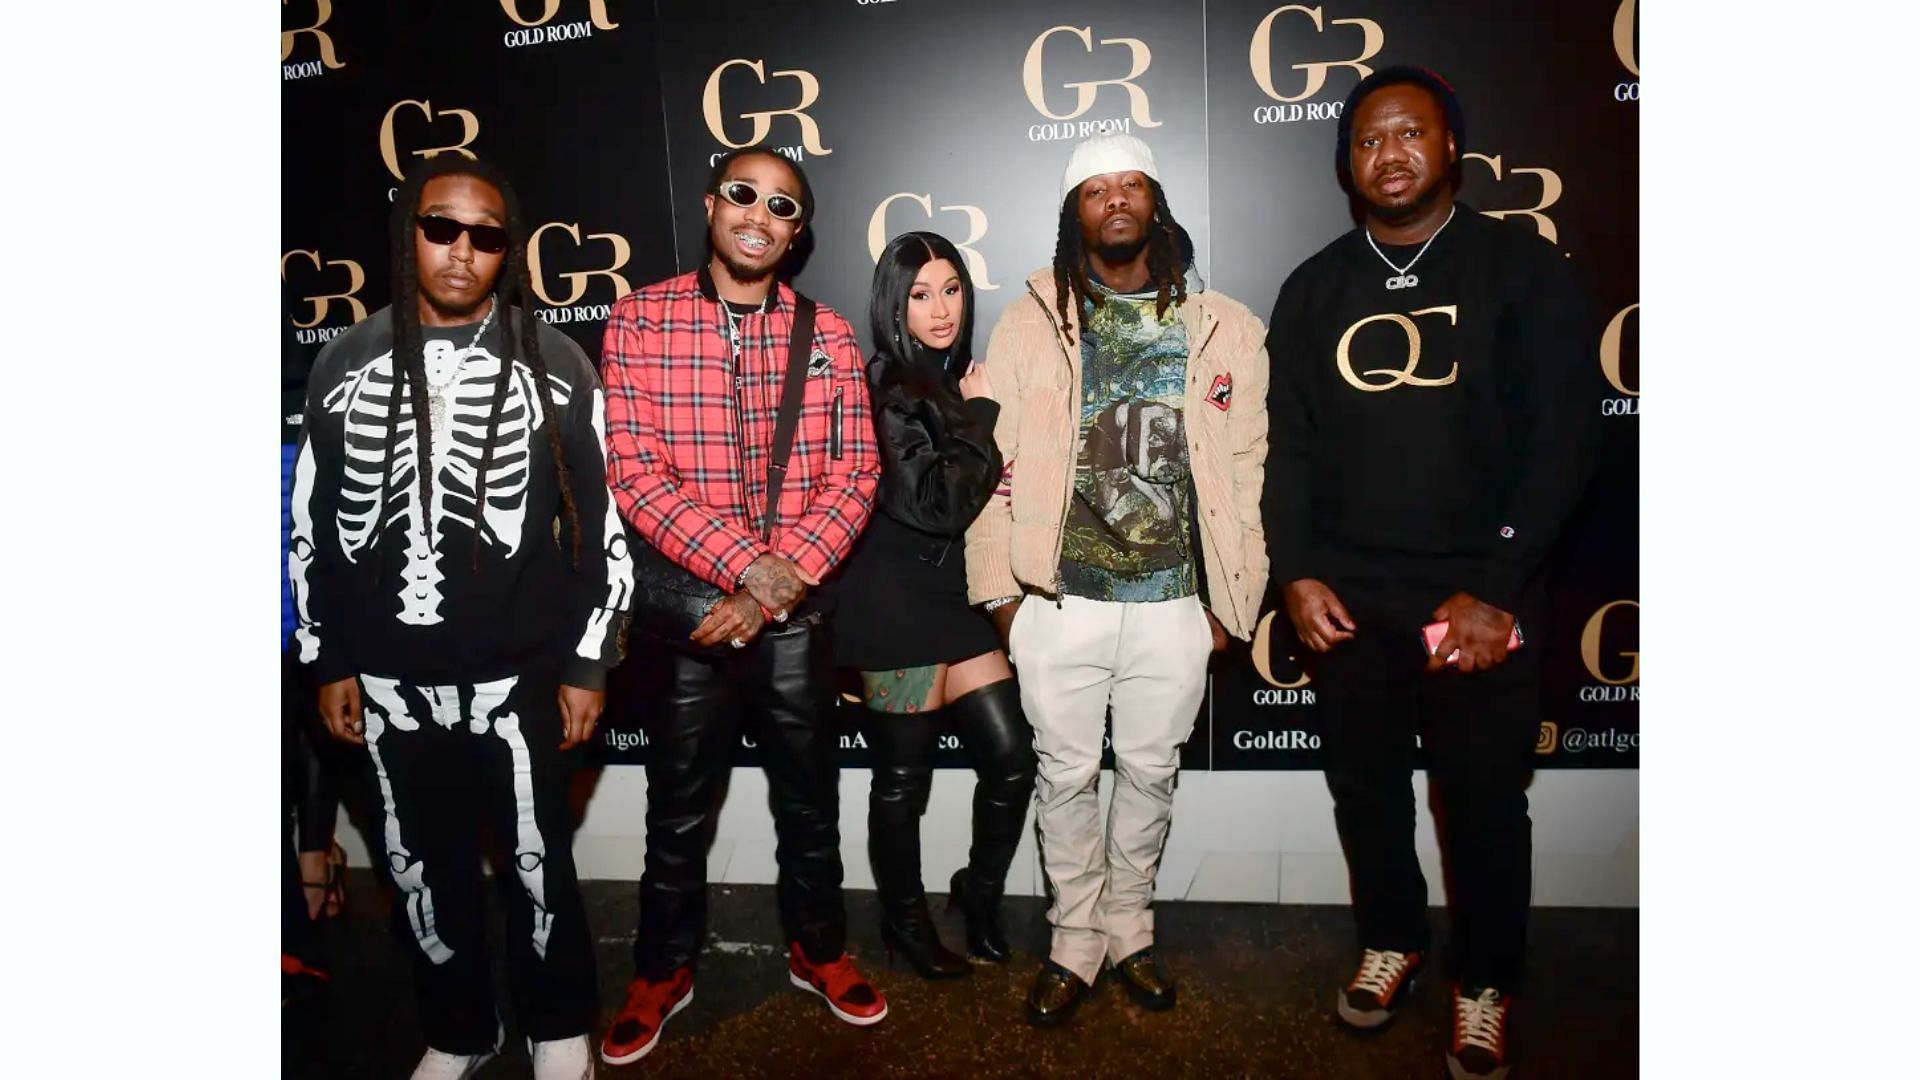 The Migos with Cardi B, who is married to Offset (image via Getty Images/Unknown)